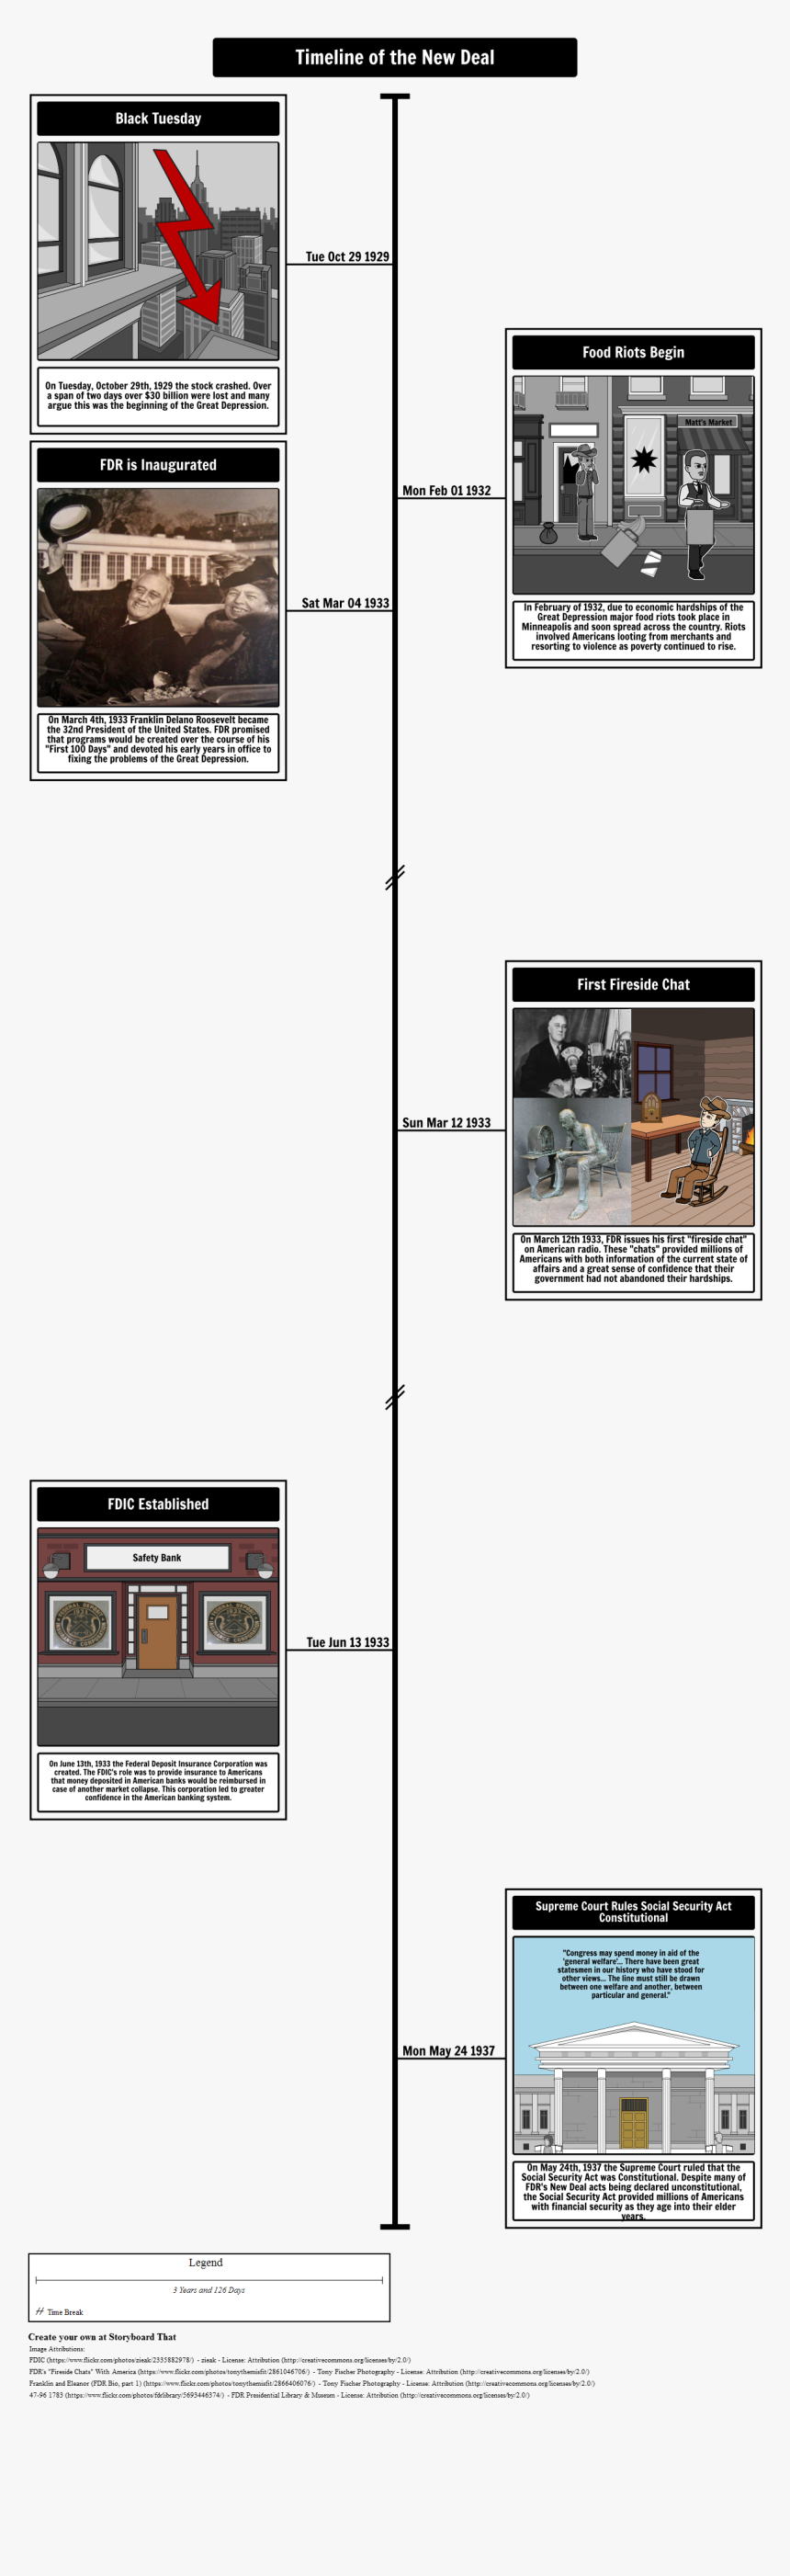 Fdr The New Deal Timeline, HD Png Download, Free Download